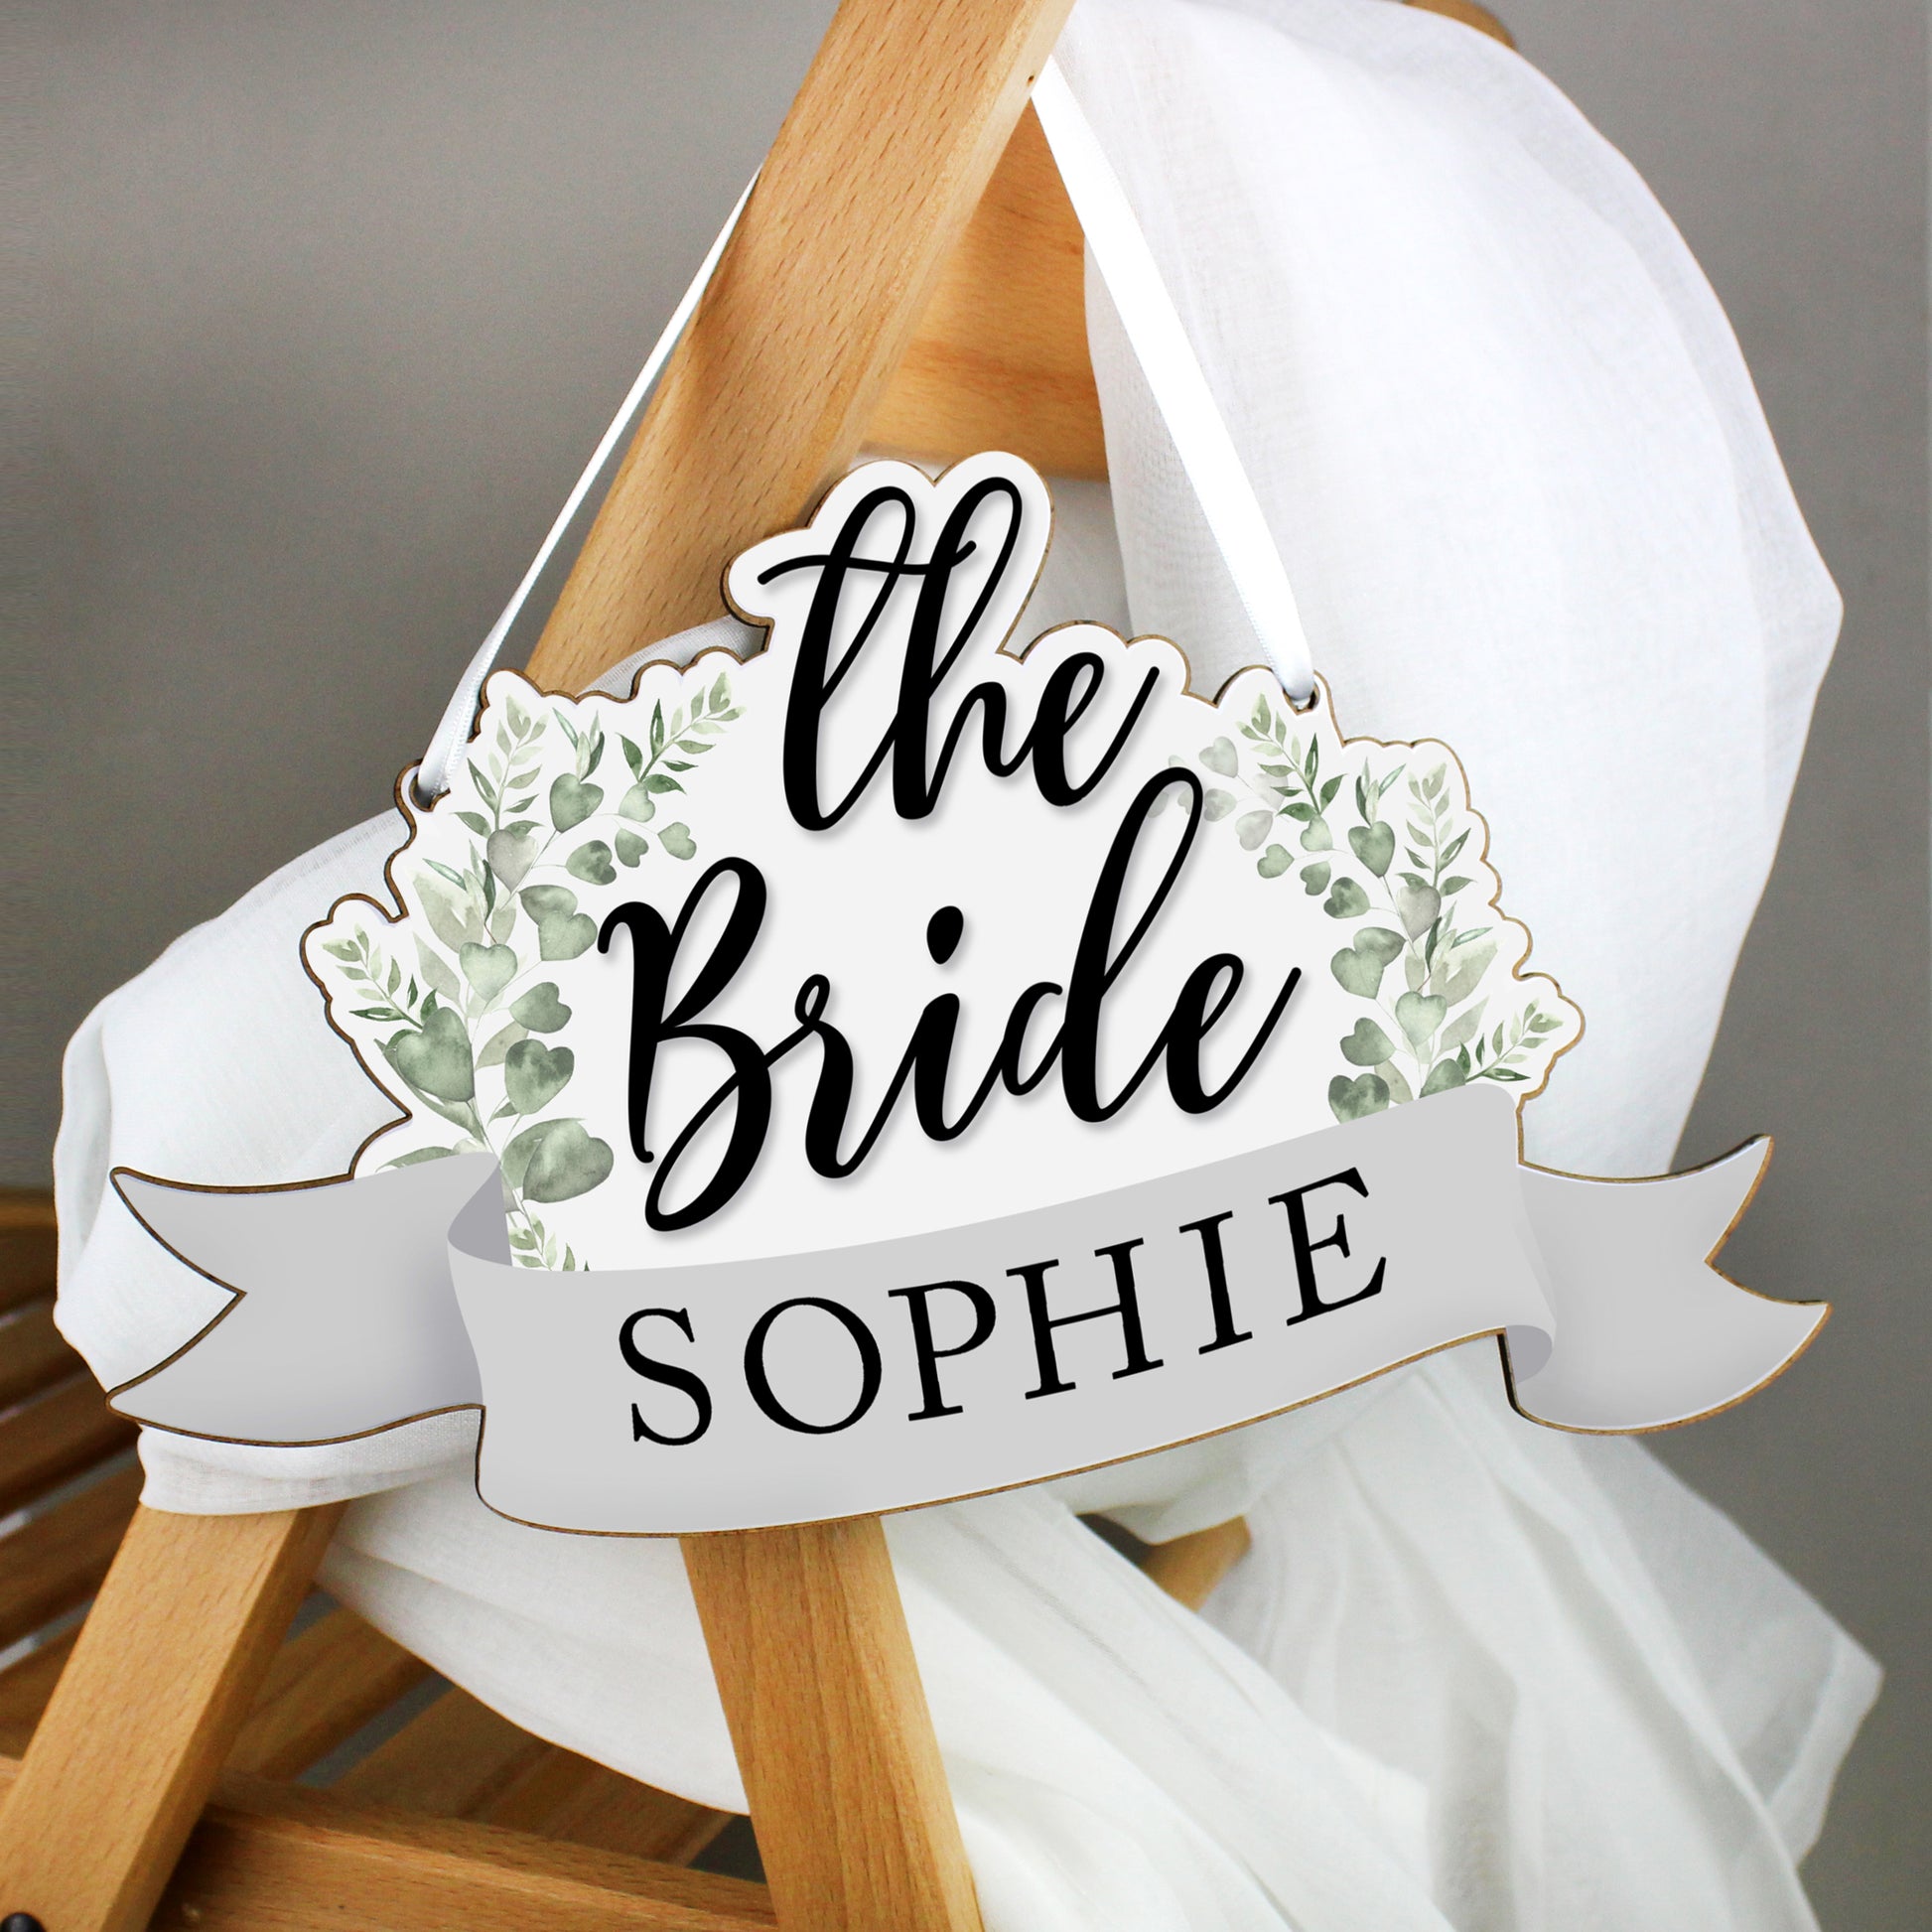 The Bride Chair Hanger with personalised name